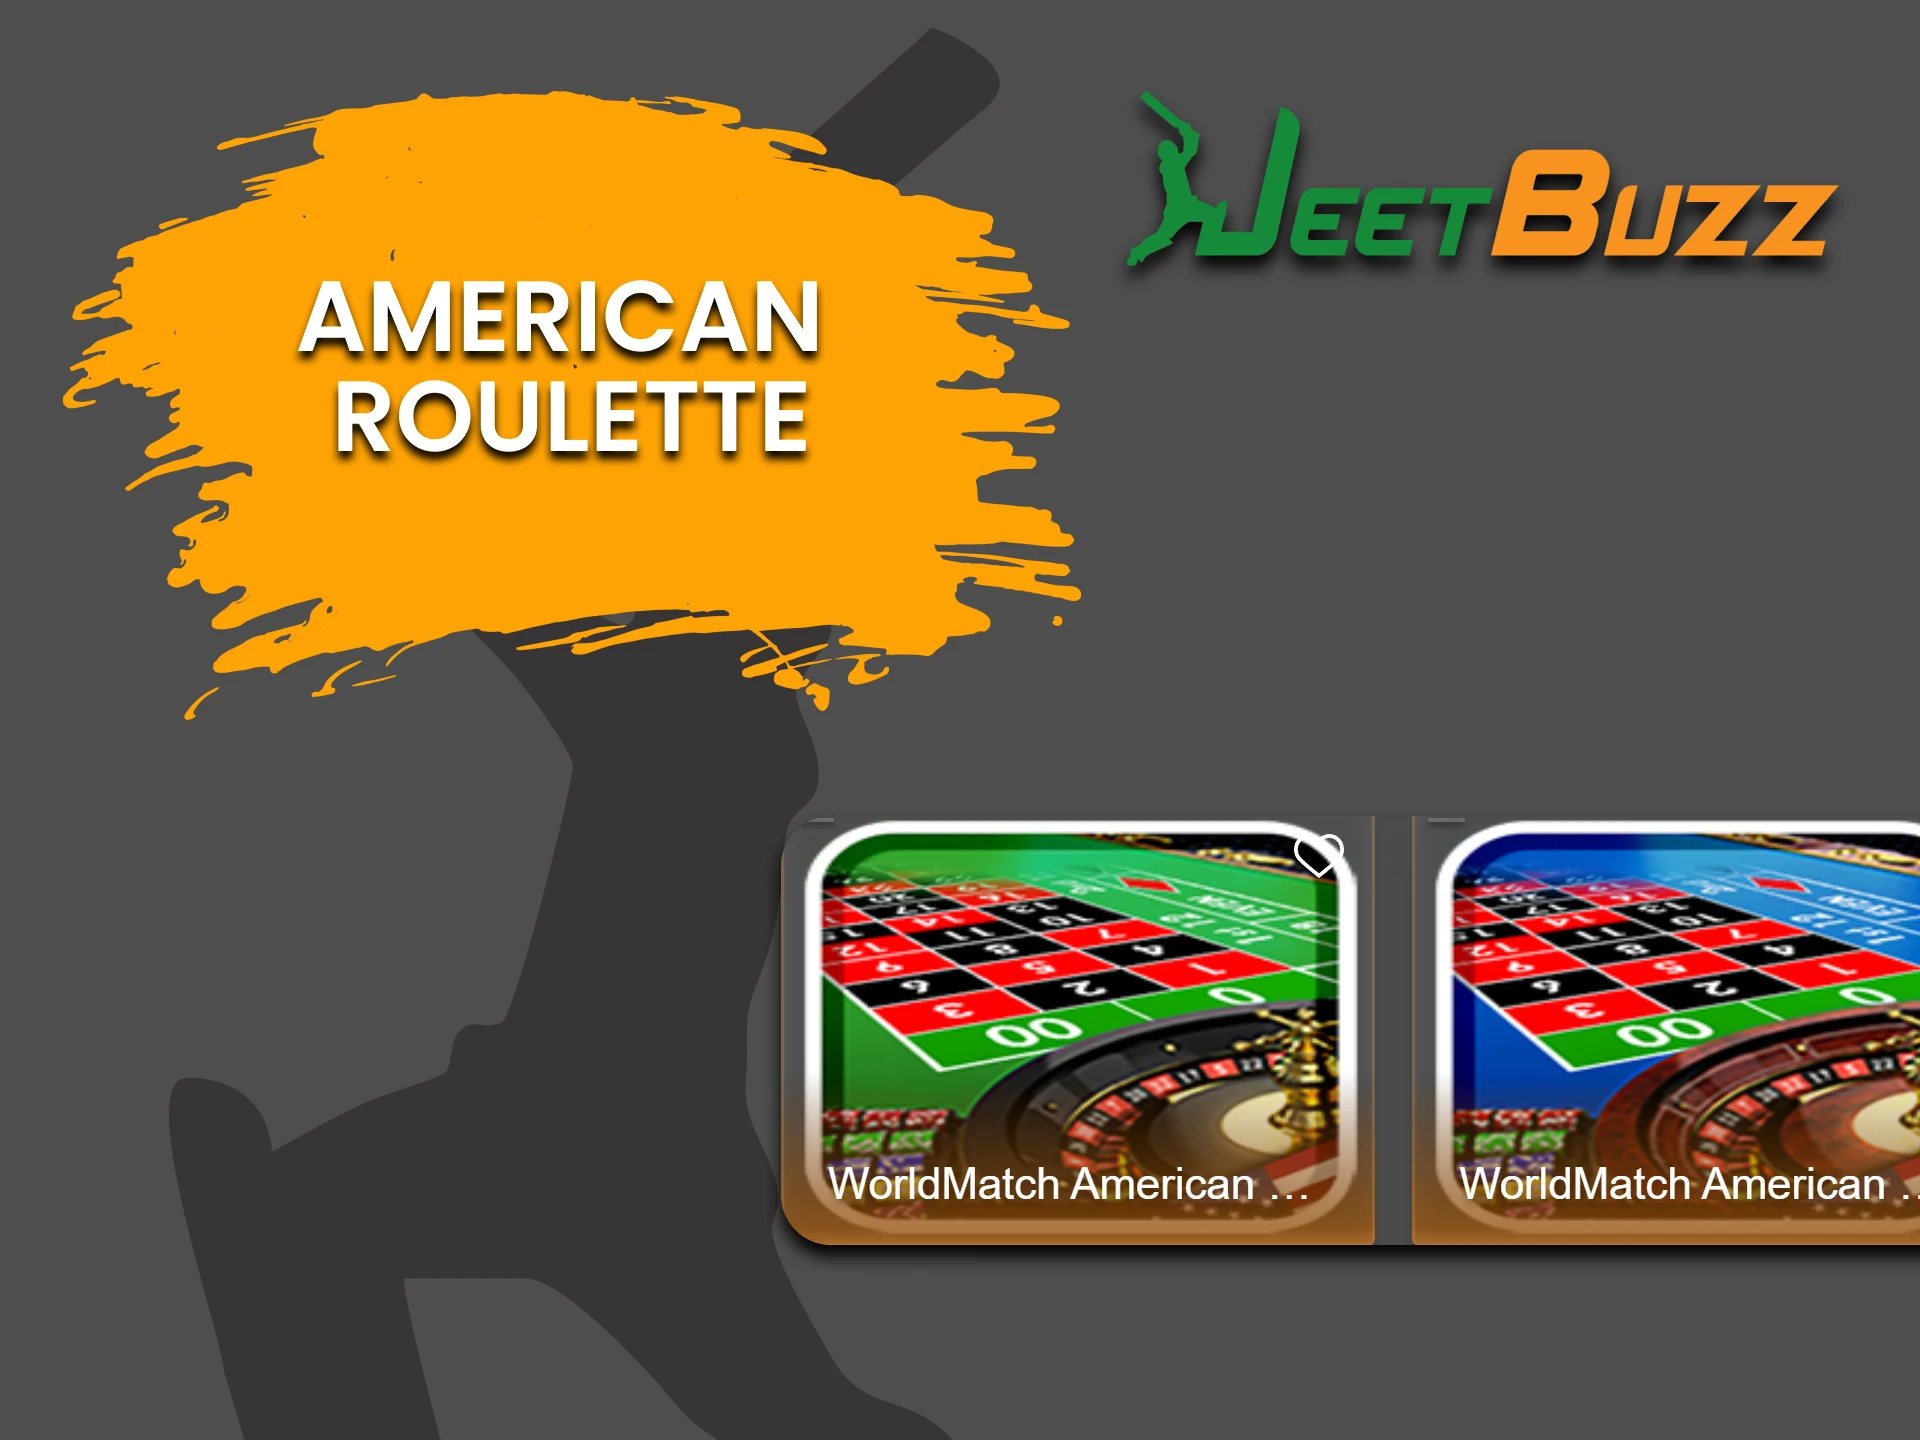 To play Roulette on JeetBuzz, choose American Roulette.